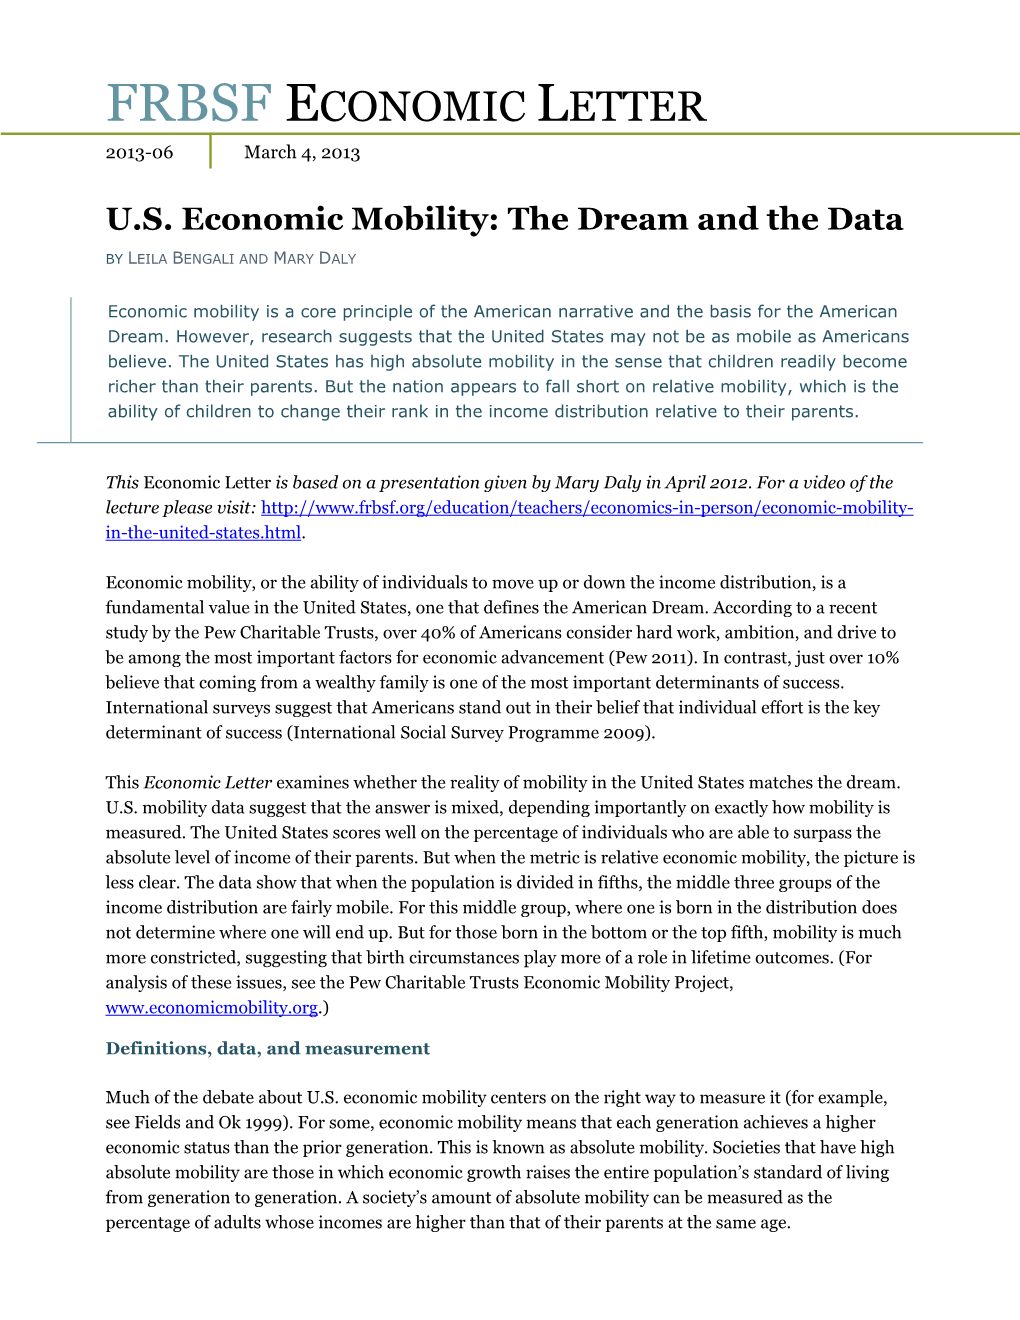 U.S. Economic Mobility: the Dream and the Data